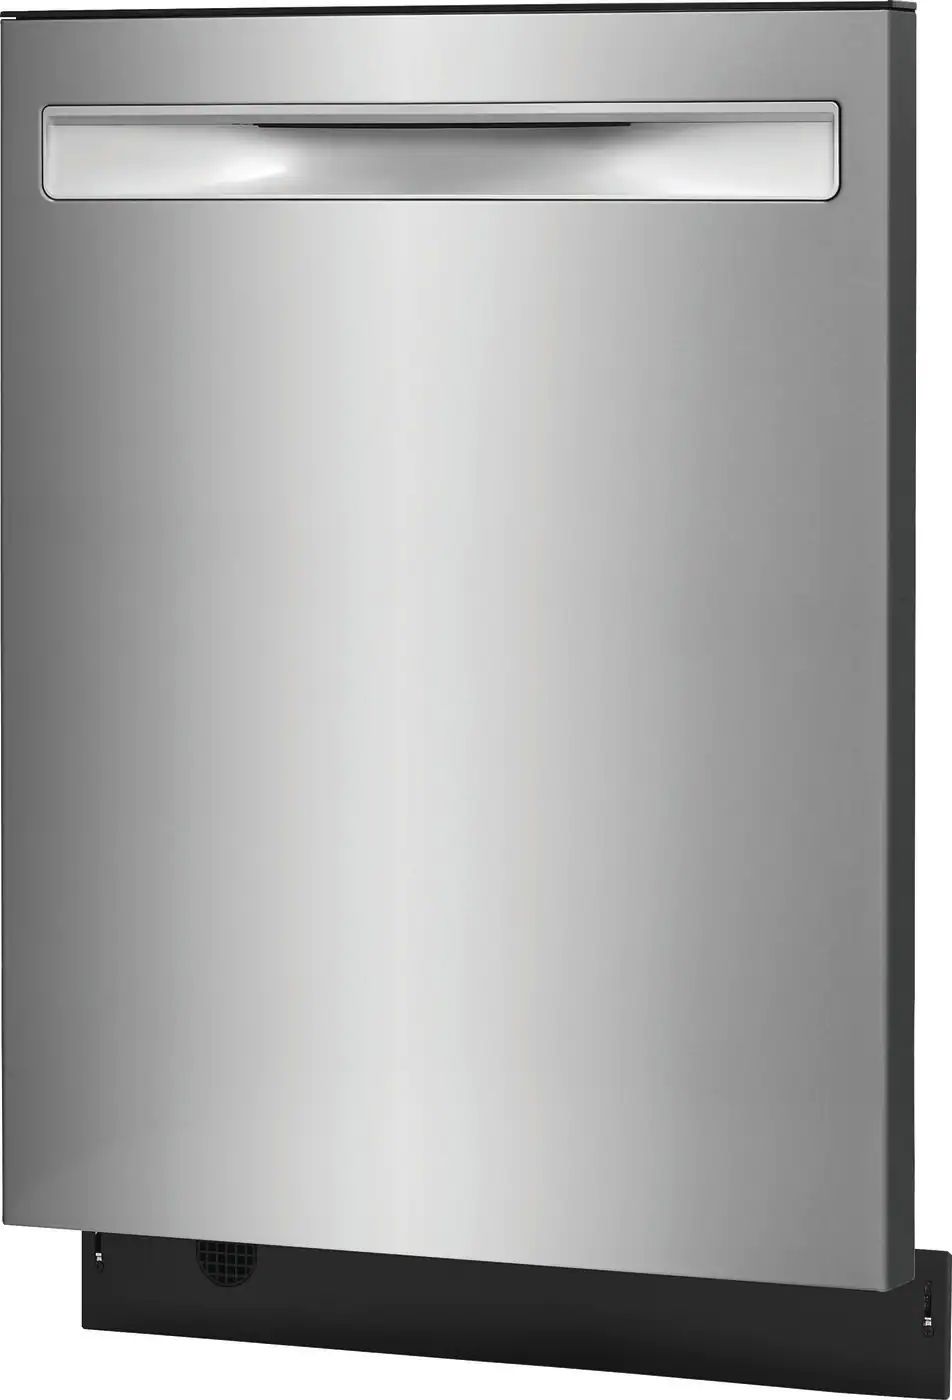 frigidaire-gallery-24-smudge-proof-stainless-steel-built-in